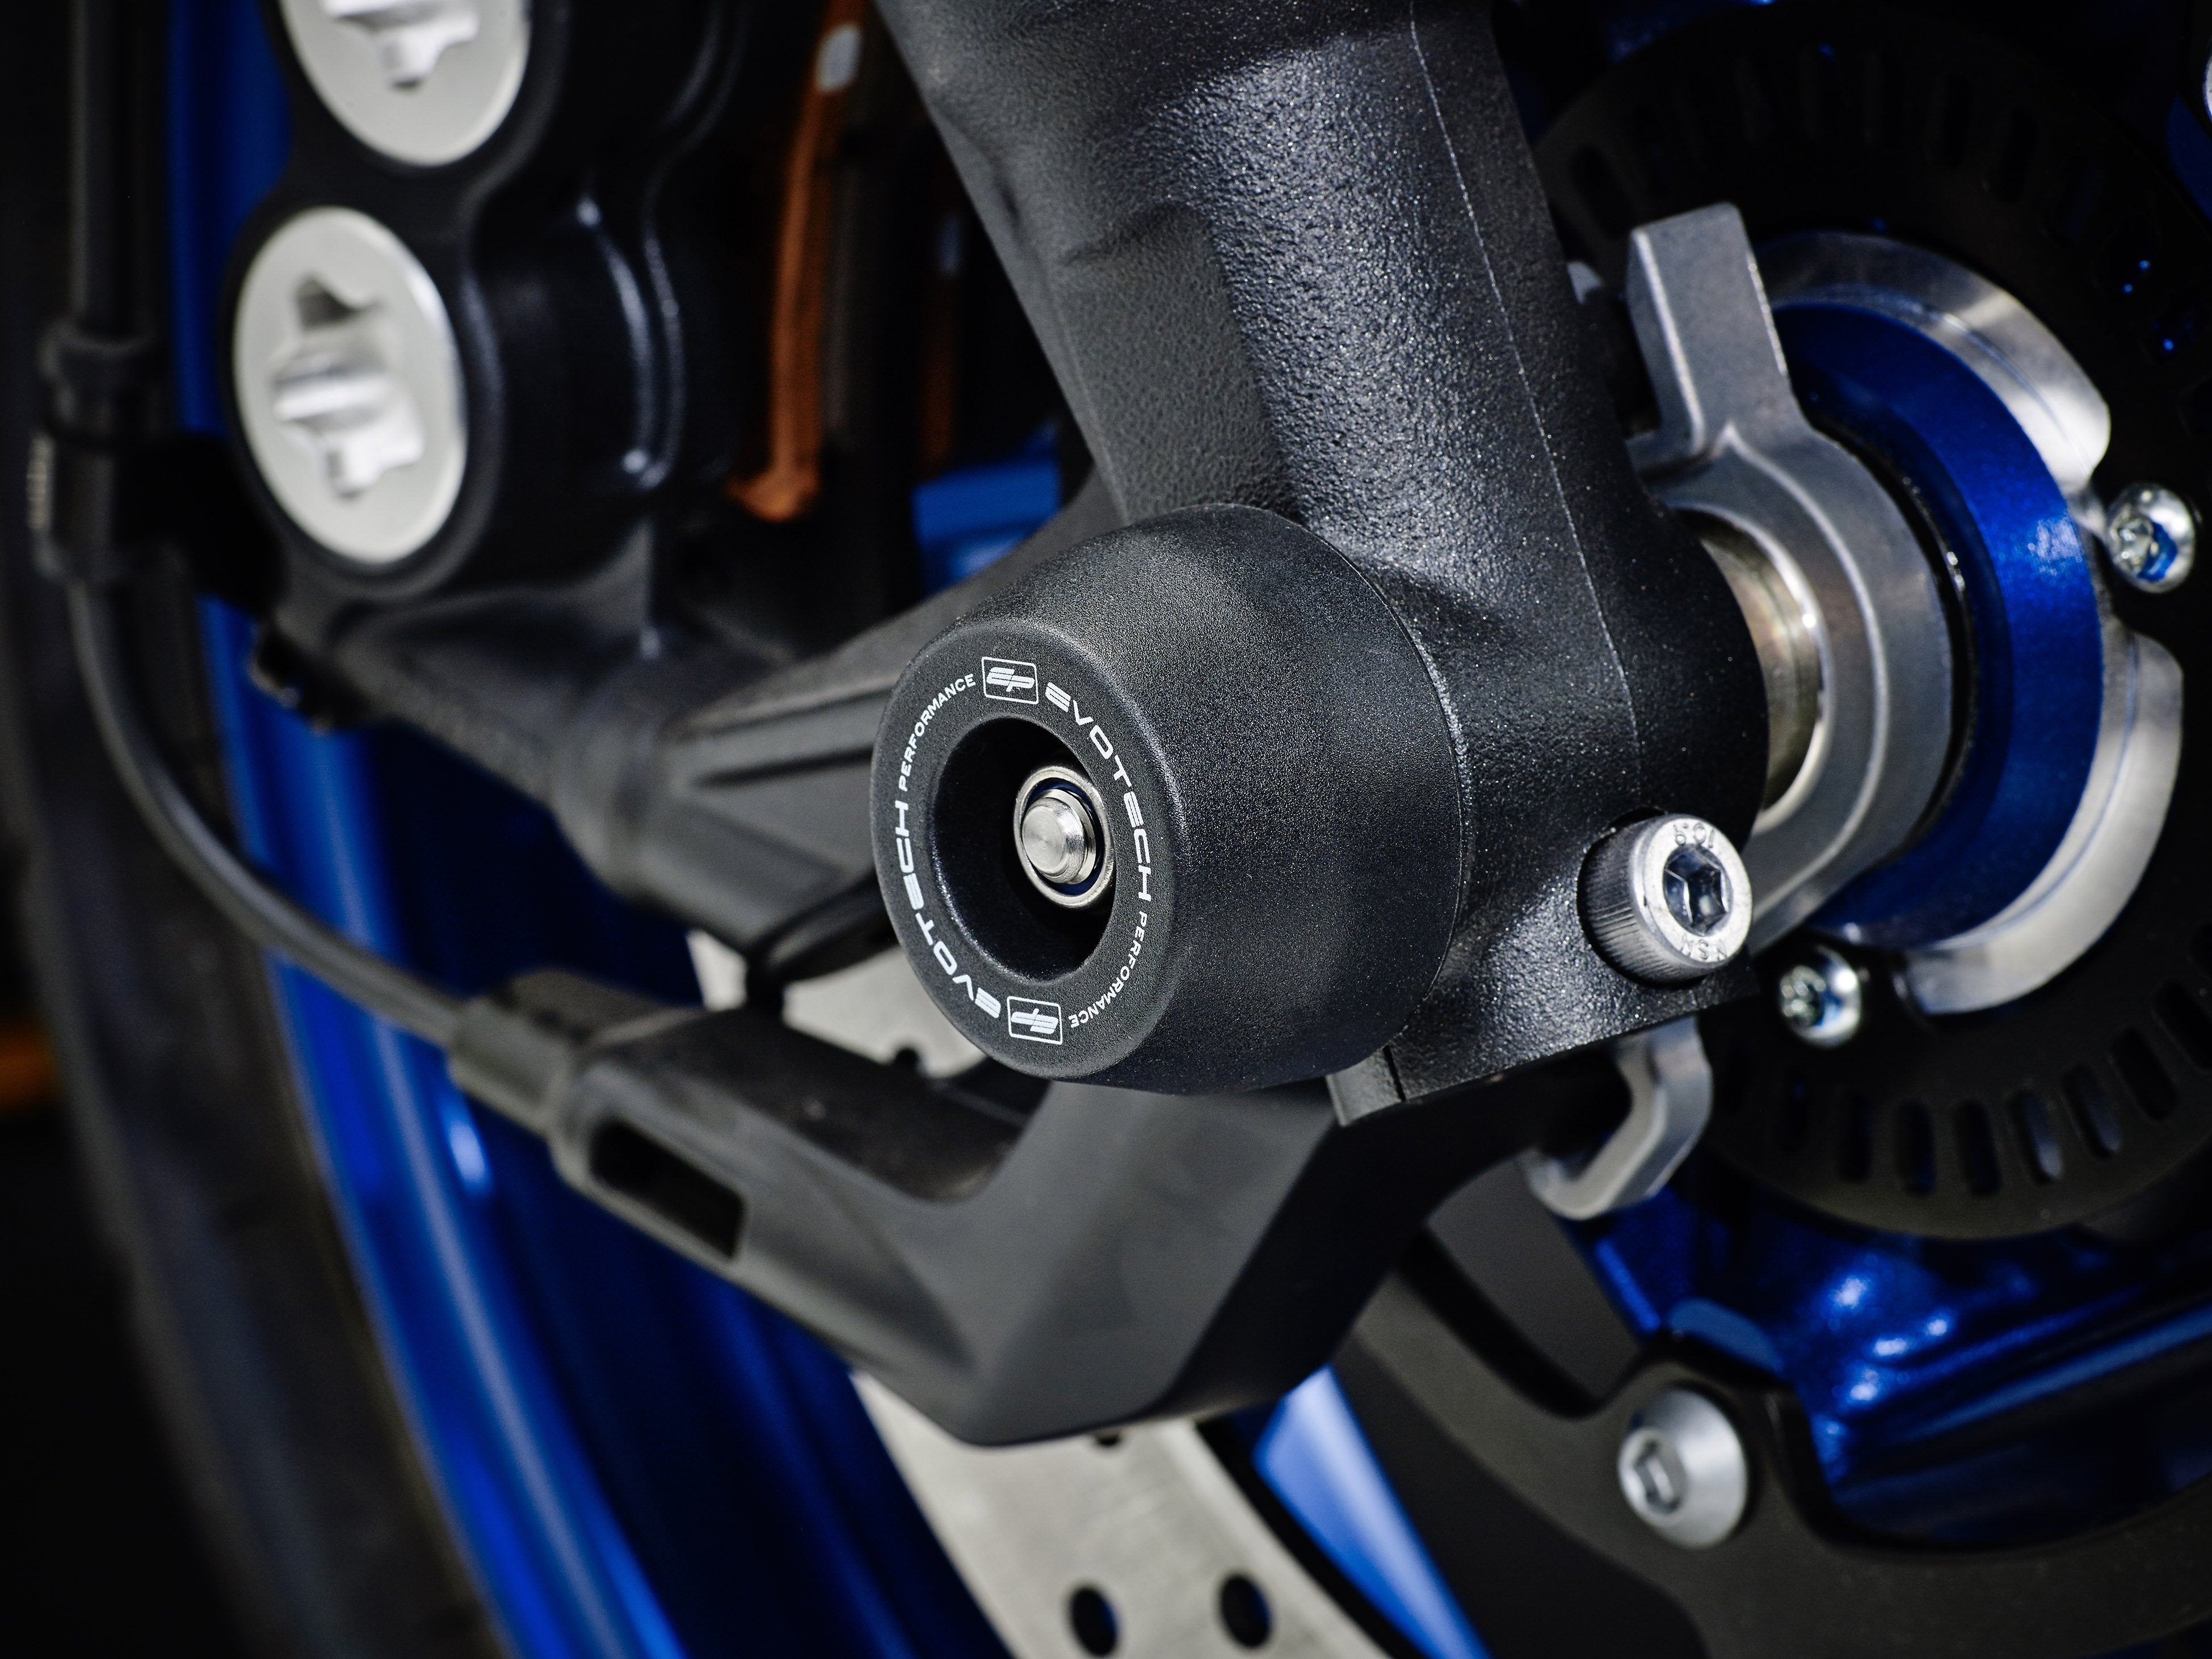 EP Spindle Bobbins Kit for the Yamaha Tracer 9 fitted to the front wheel, protecting the front forks and brake calipers.